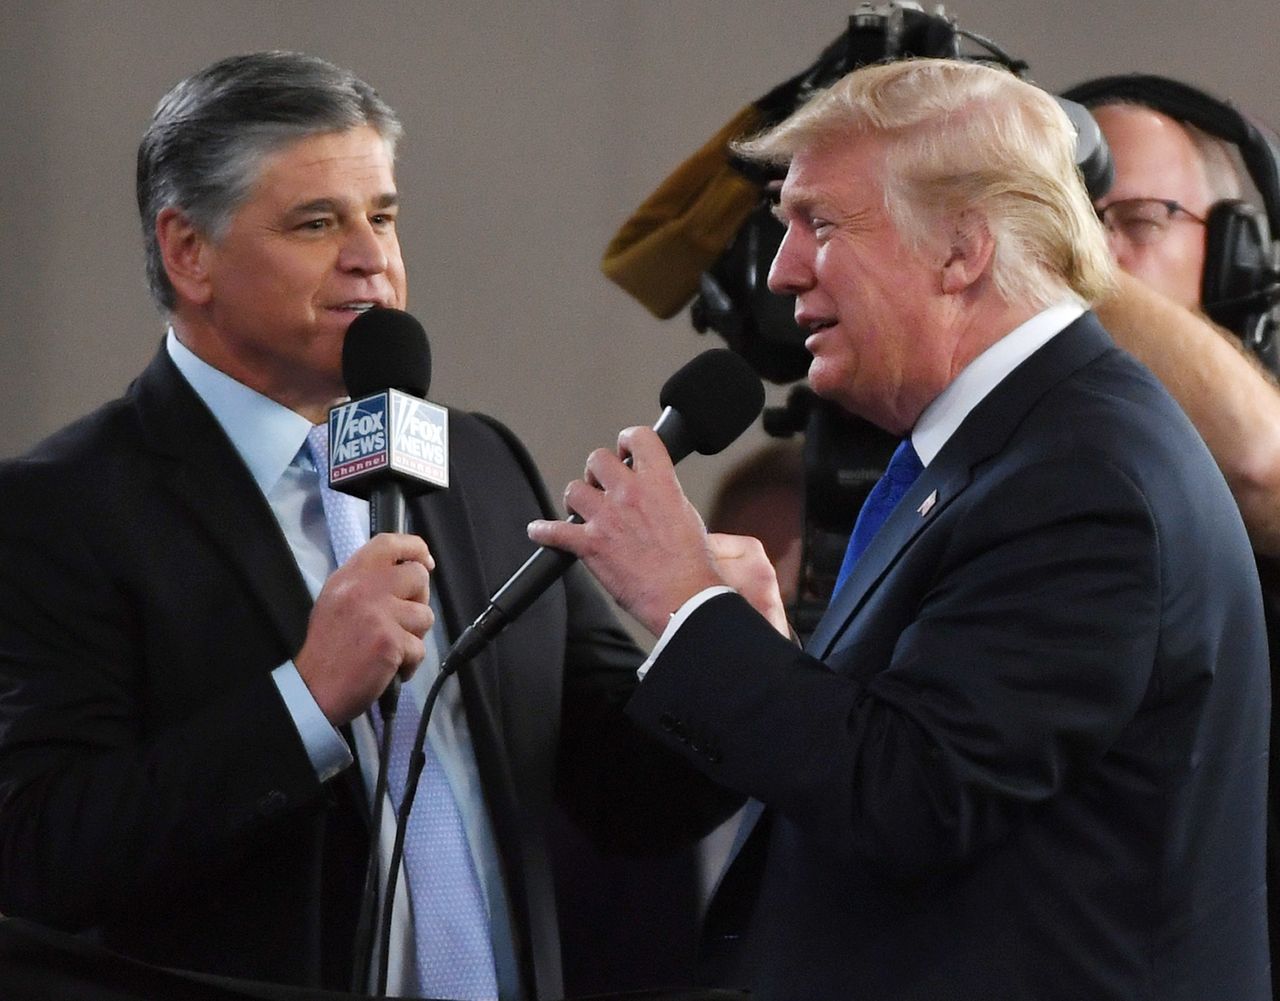 Fox News Channel and radio talk show host Sean Hannity interviews Trump before a campaign rally in 2018. Hannity has sycophantically defended Trump throughout the pandemic.